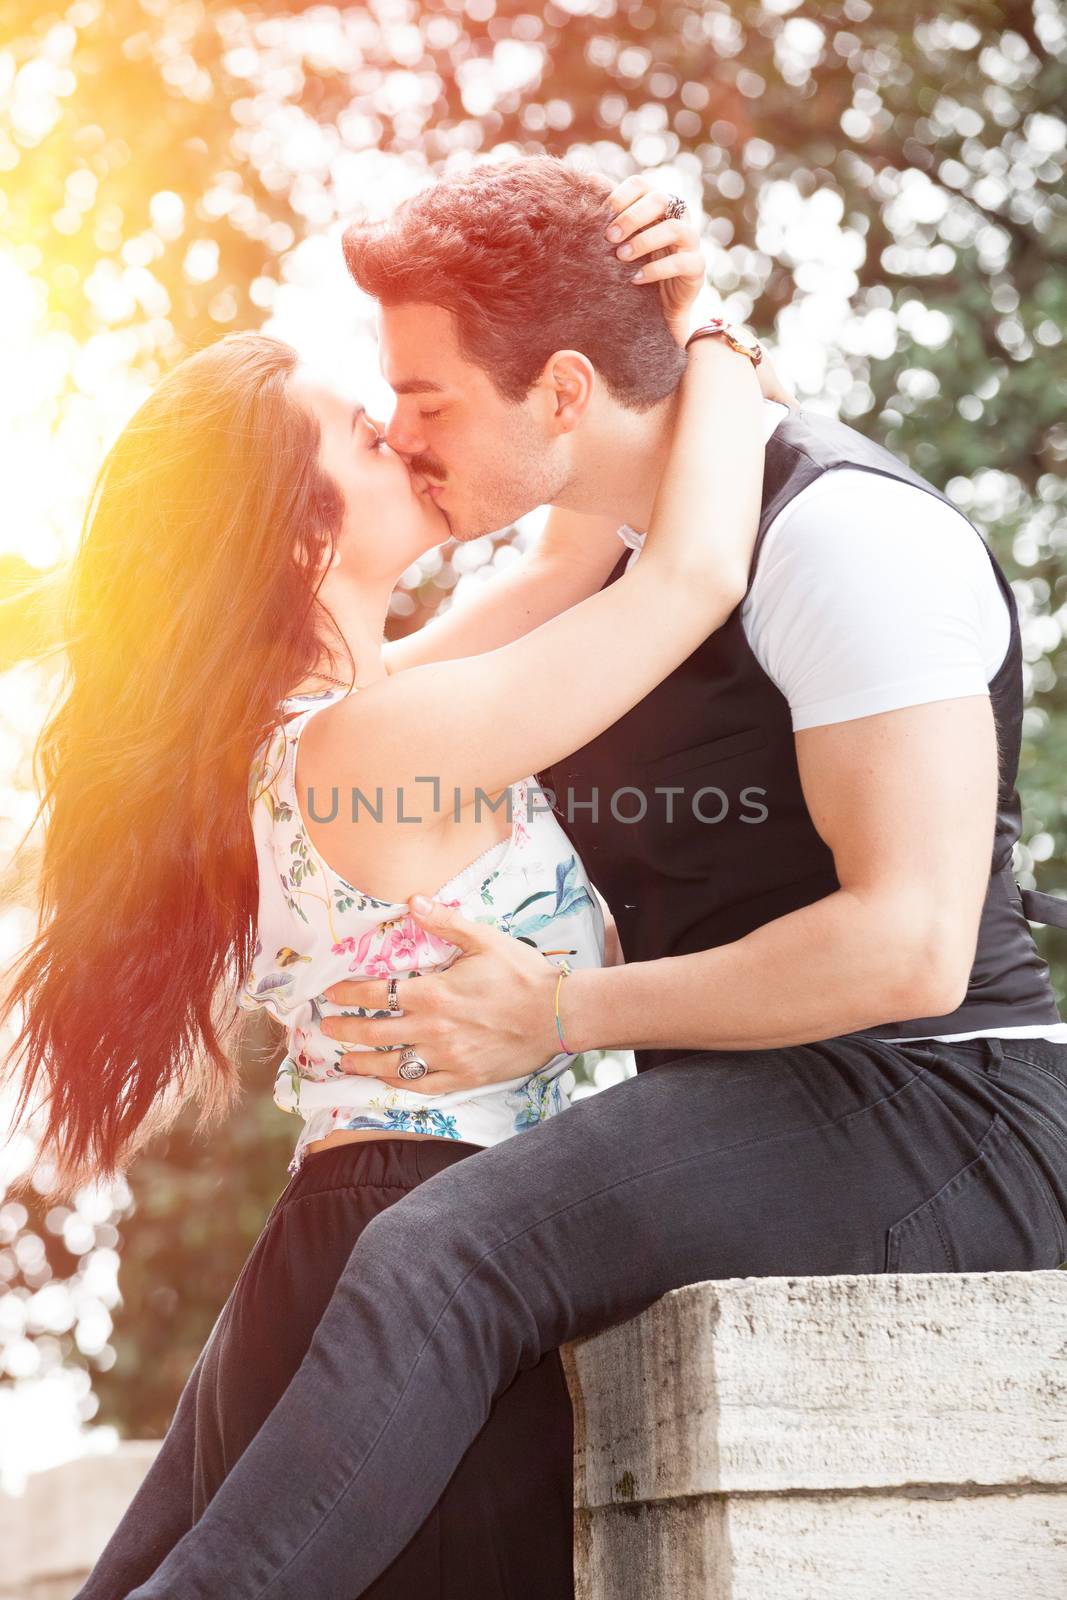 Passion and love. Couple. Harmony, tenderness, peace and love between two lovers. Young man and young woman embracing outdoors in nature. Intense feeling and fiery passion. Bright light behind.